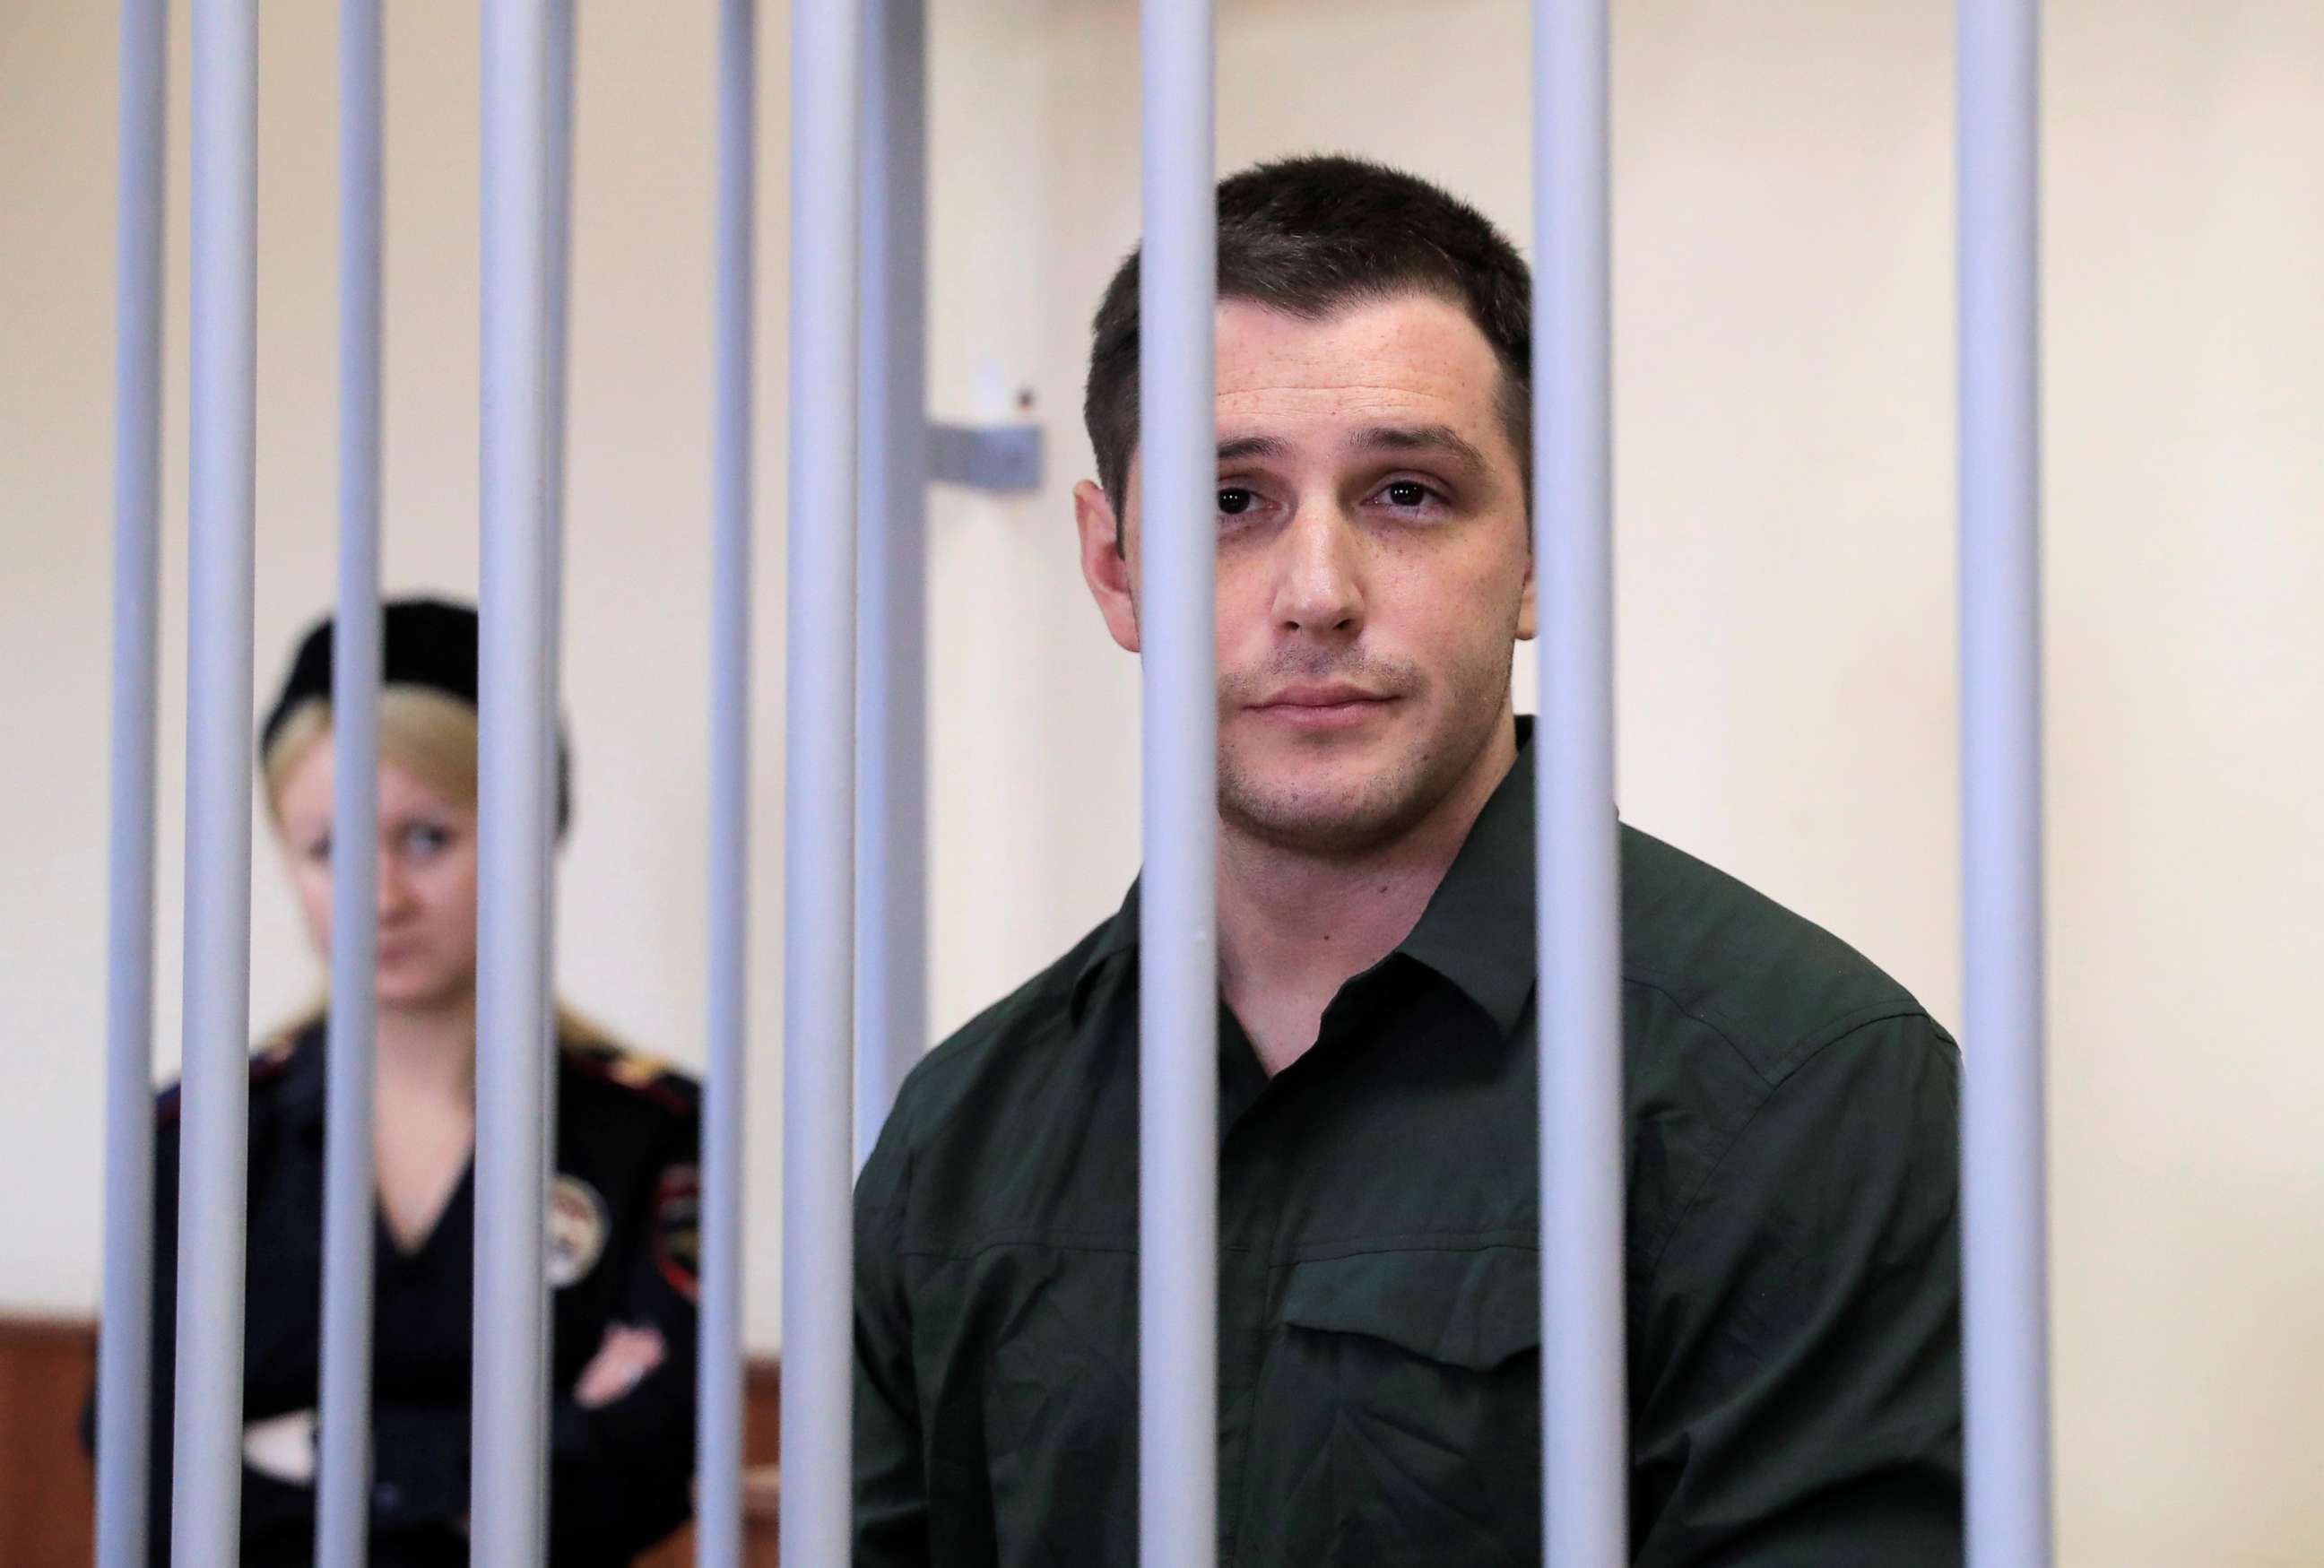 PHOTO: U.S. ex-Marine Trevor Reed, who was detained in 2019 and accused of assaulting police officers, stands inside a defendants' cage during a court hearing in Moscow, March 11, 2020.